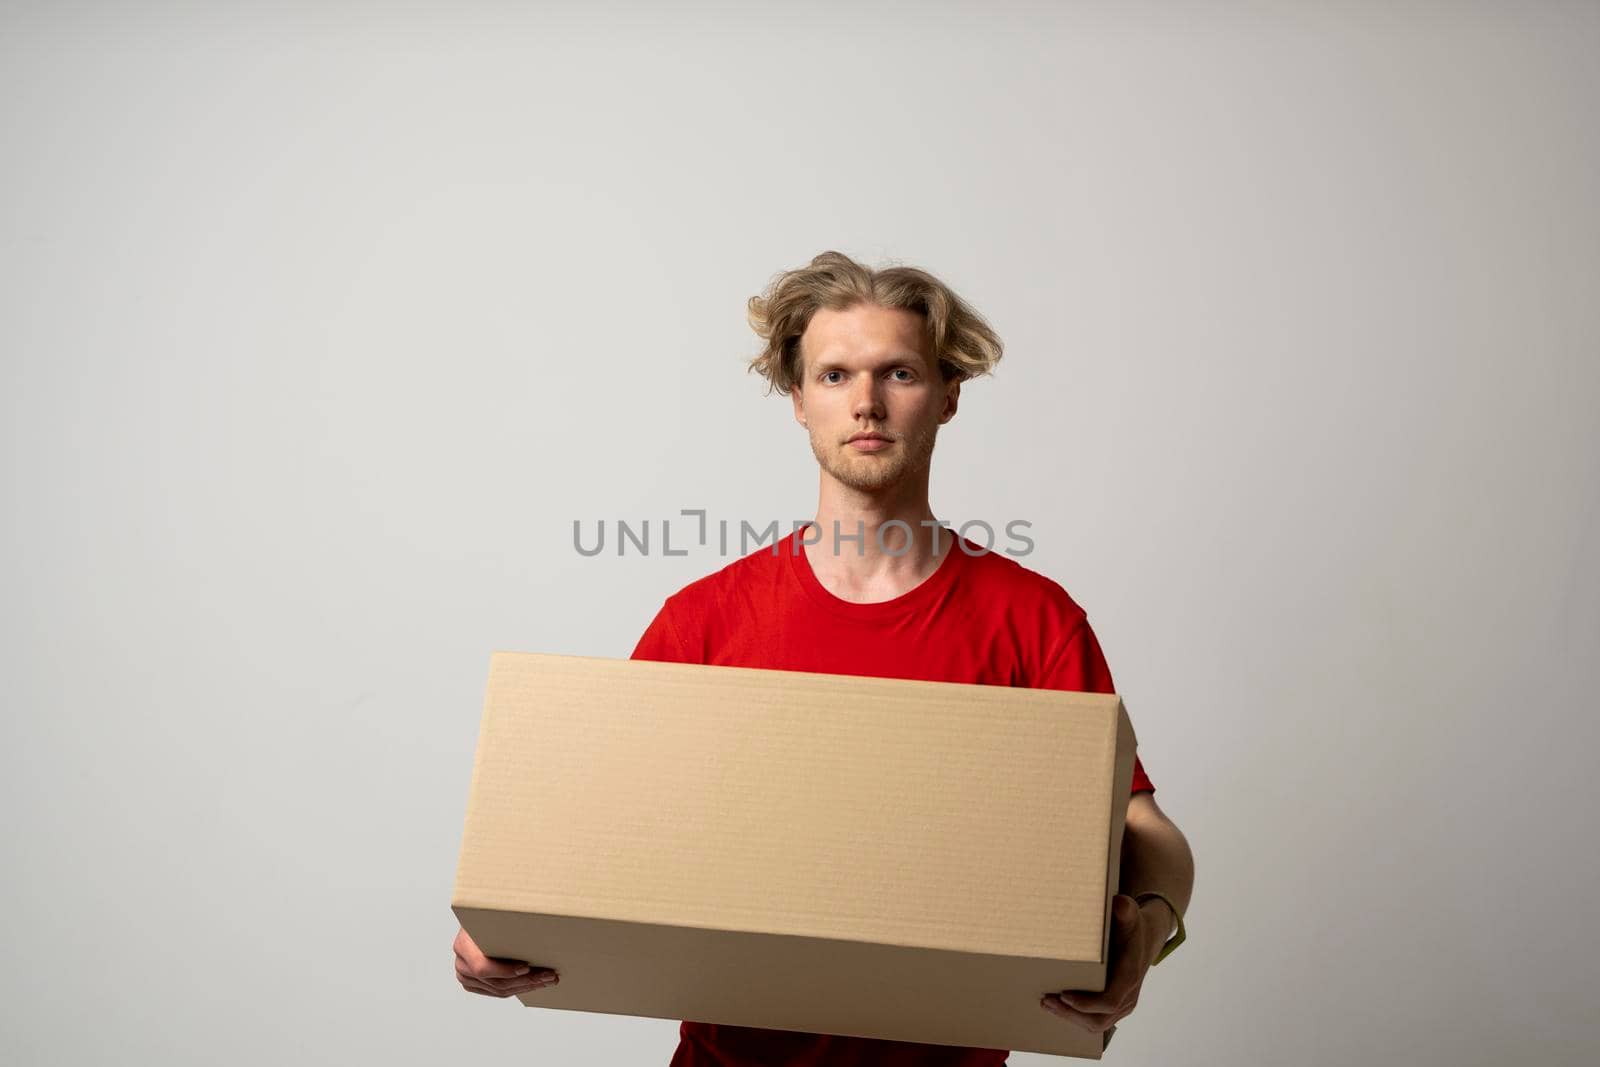 Delivery service. Happy young delivery man in red t-shirt standing with parcel isolated on white background